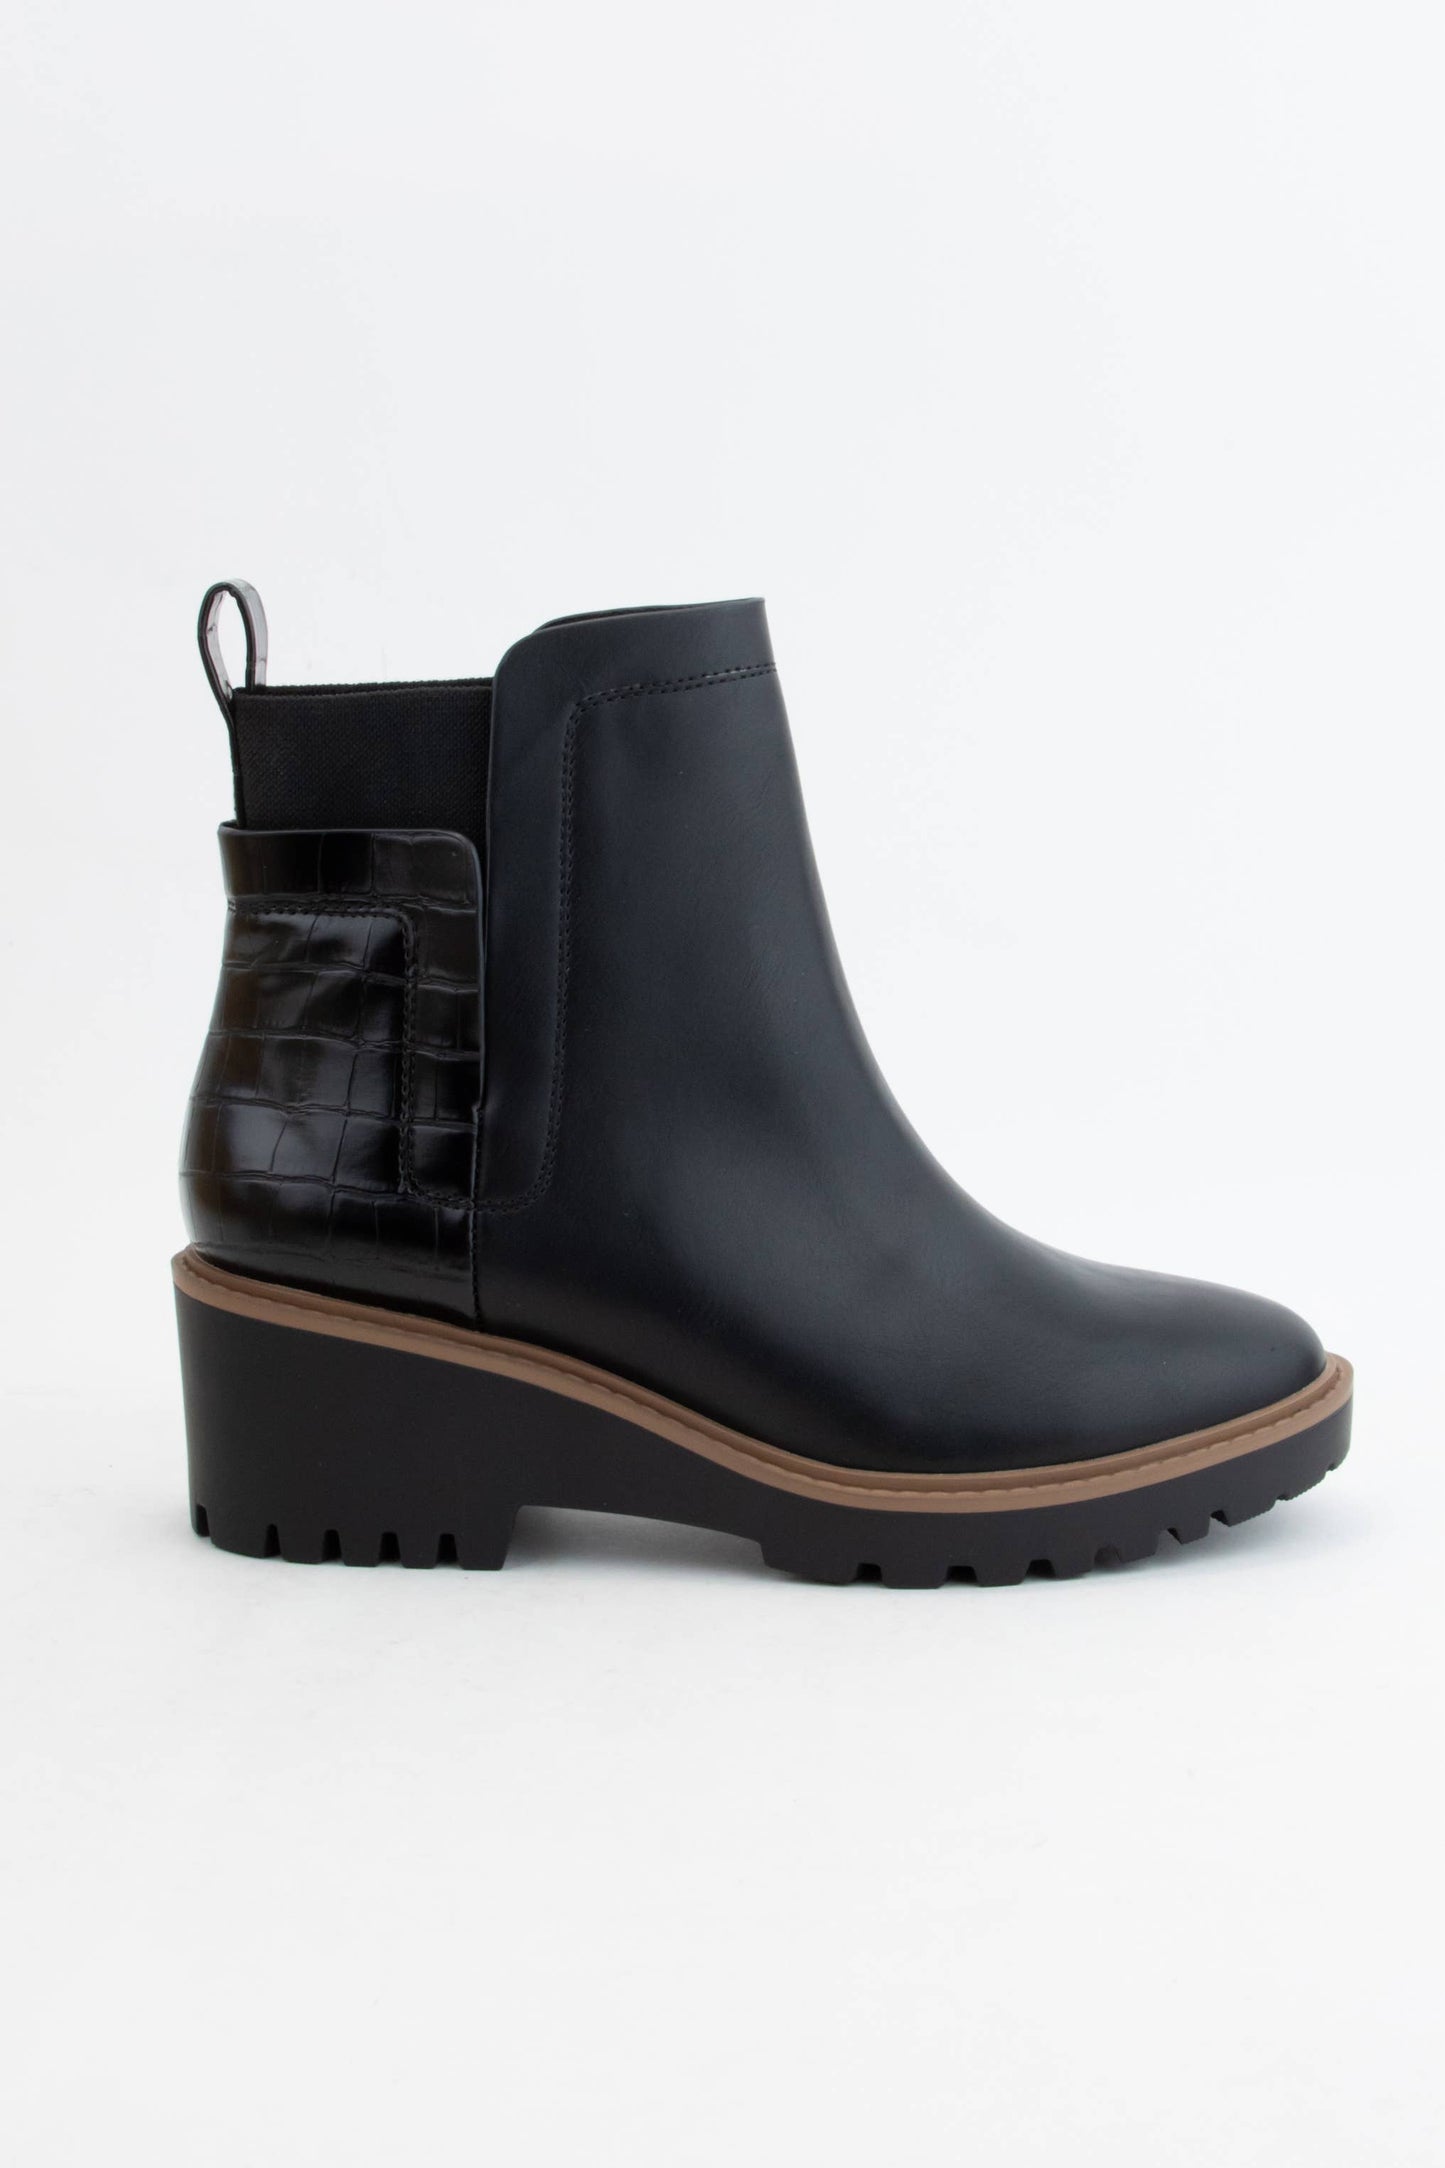 Wedge Heeled Chelsea Ankle Boots